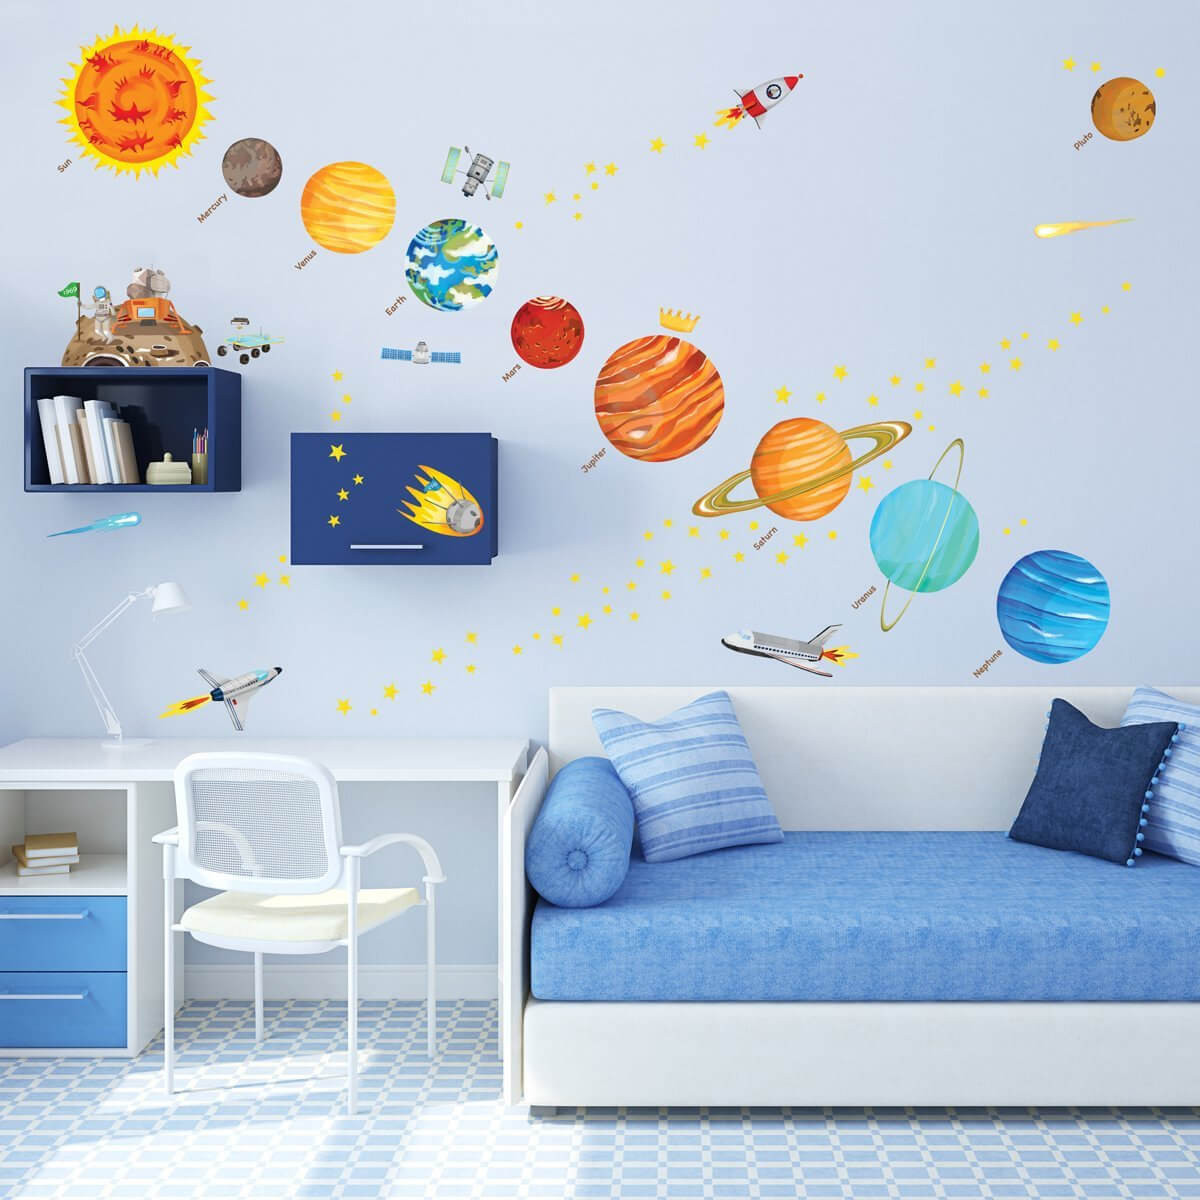 Kids Room Murals
 These Educational Wall Ideas are Perfect for Kids